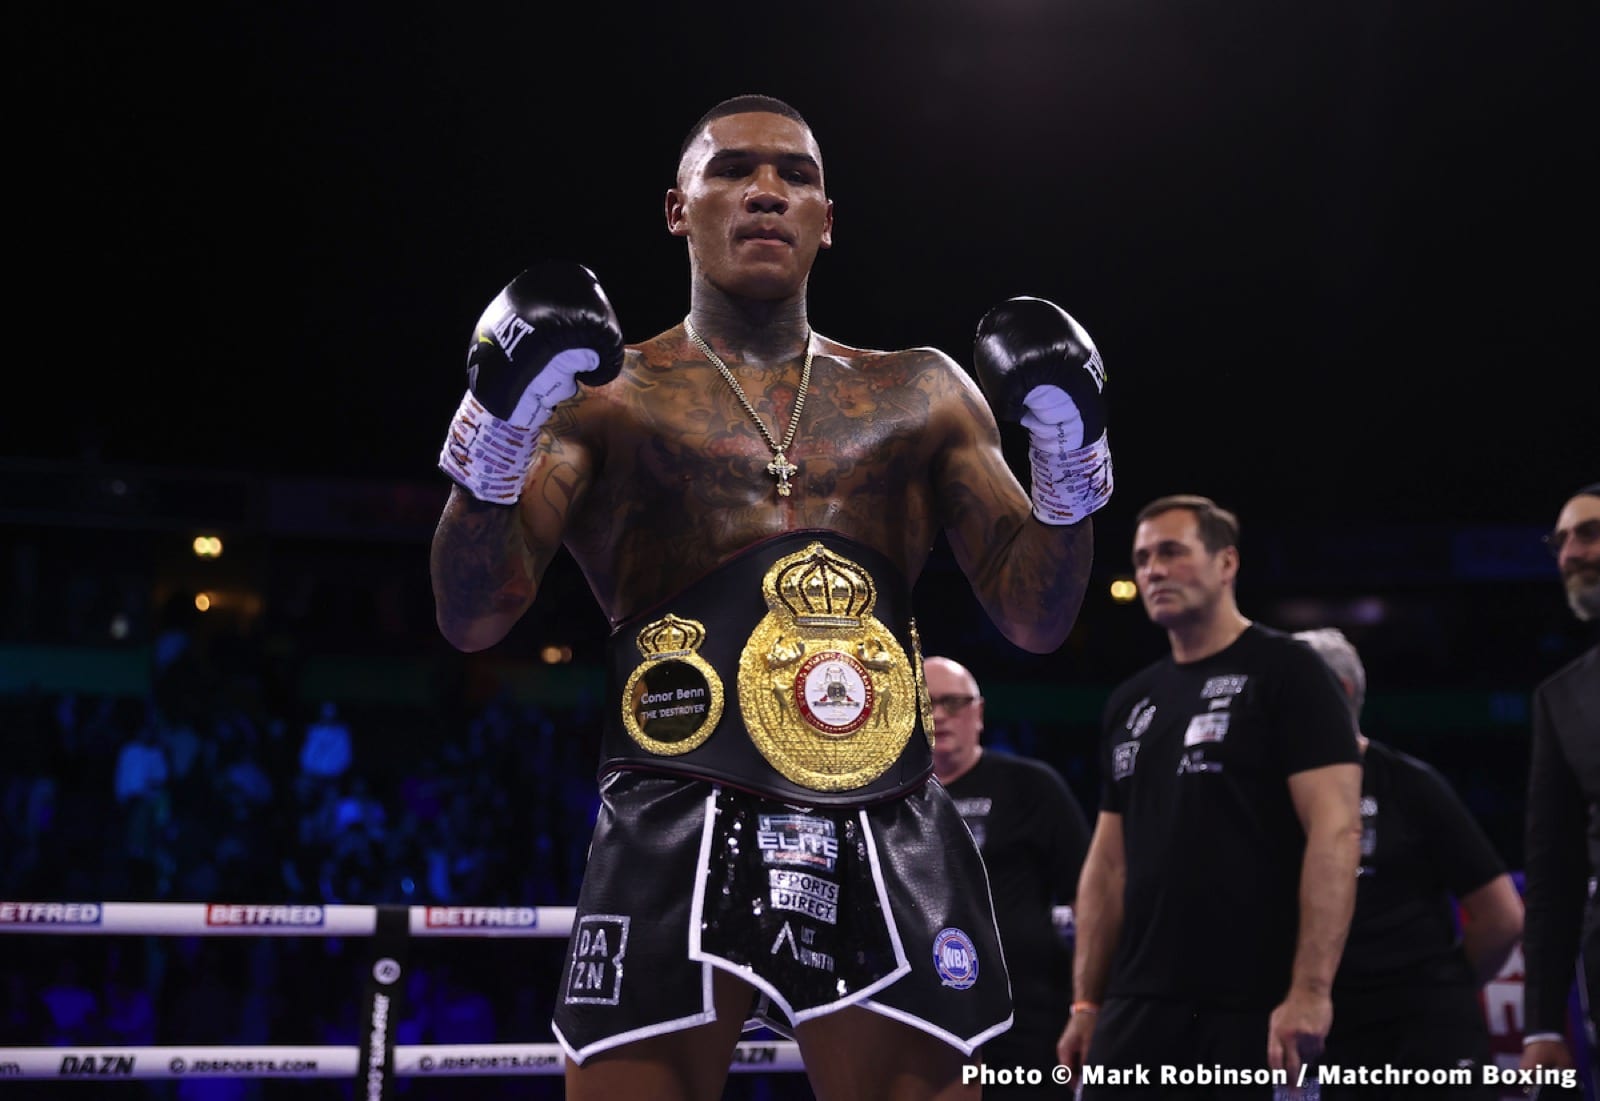 Image: Conor Benn can't be underestimated against Chris Eubank Jr says Johnny Nelson